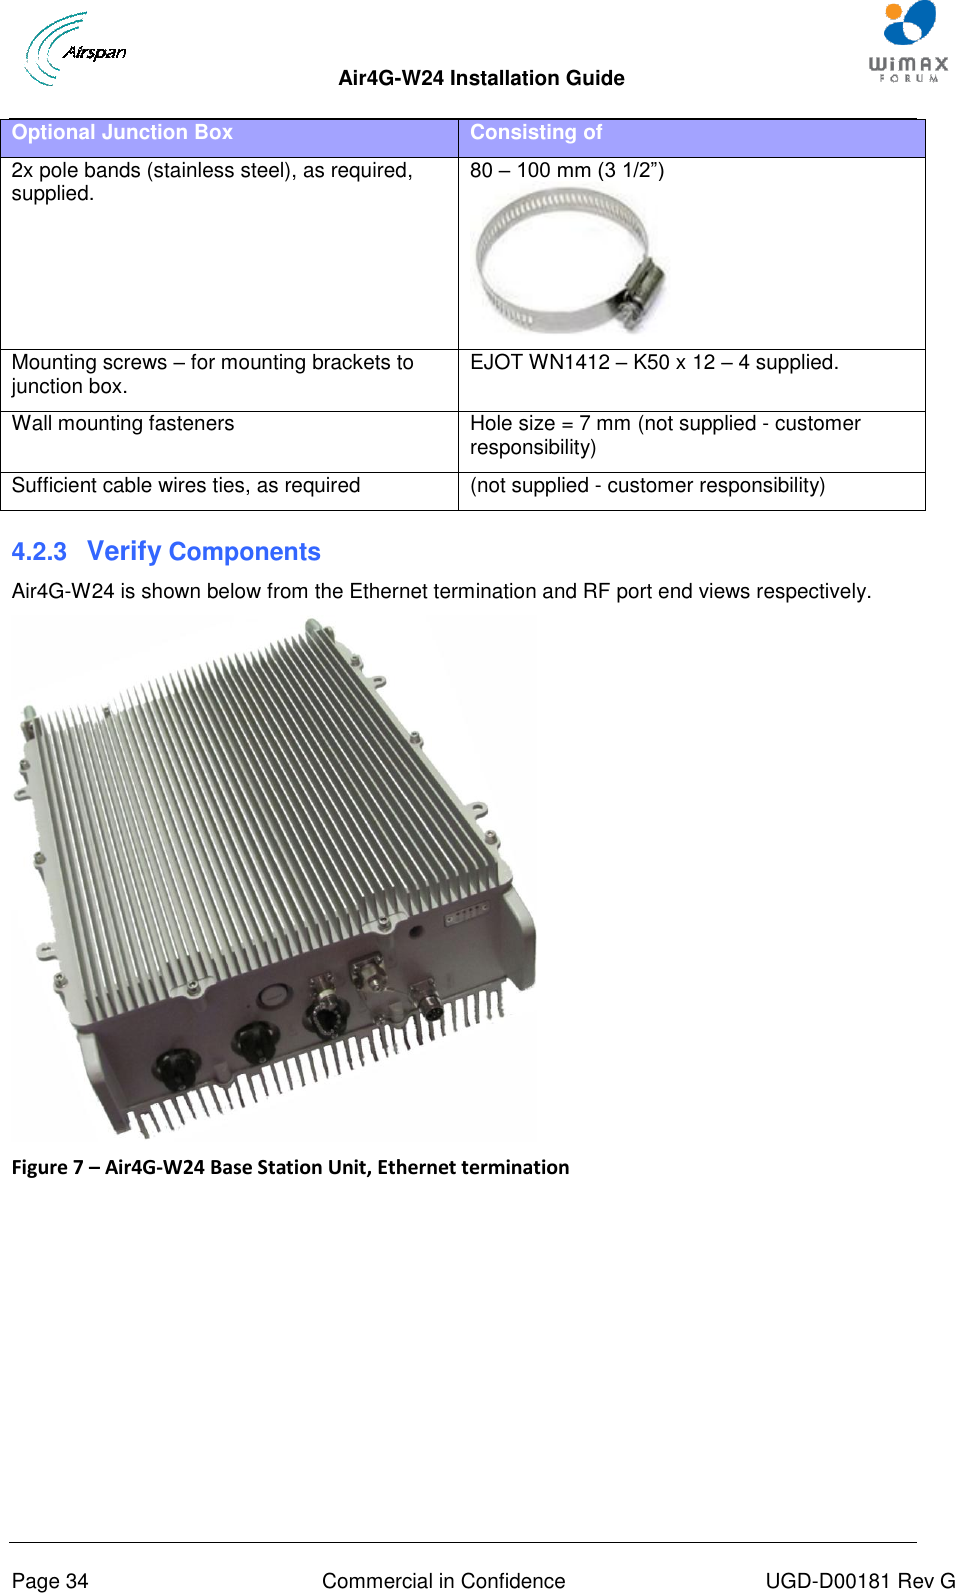  Air4G-W24 Installation Guide       Page 34  Commercial in Confidence  UGD-D00181 Rev G Optional Junction Box Consisting of 2x pole bands (stainless steel), as required, supplied. 80 – 100 mm (3 1/2”)  Mounting screws – for mounting brackets to junction box. EJOT WN1412 – K50 x 12 – 4 supplied. Wall mounting fasteners  Hole size = 7 mm (not supplied - customer responsibility) Sufficient cable wires ties, as required (not supplied - customer responsibility) 4.2.3  Verify Components Air4G-W24 is shown below from the Ethernet termination and RF port end views respectively.  Figure 7 – Air4G-W24 Base Station Unit, Ethernet termination  